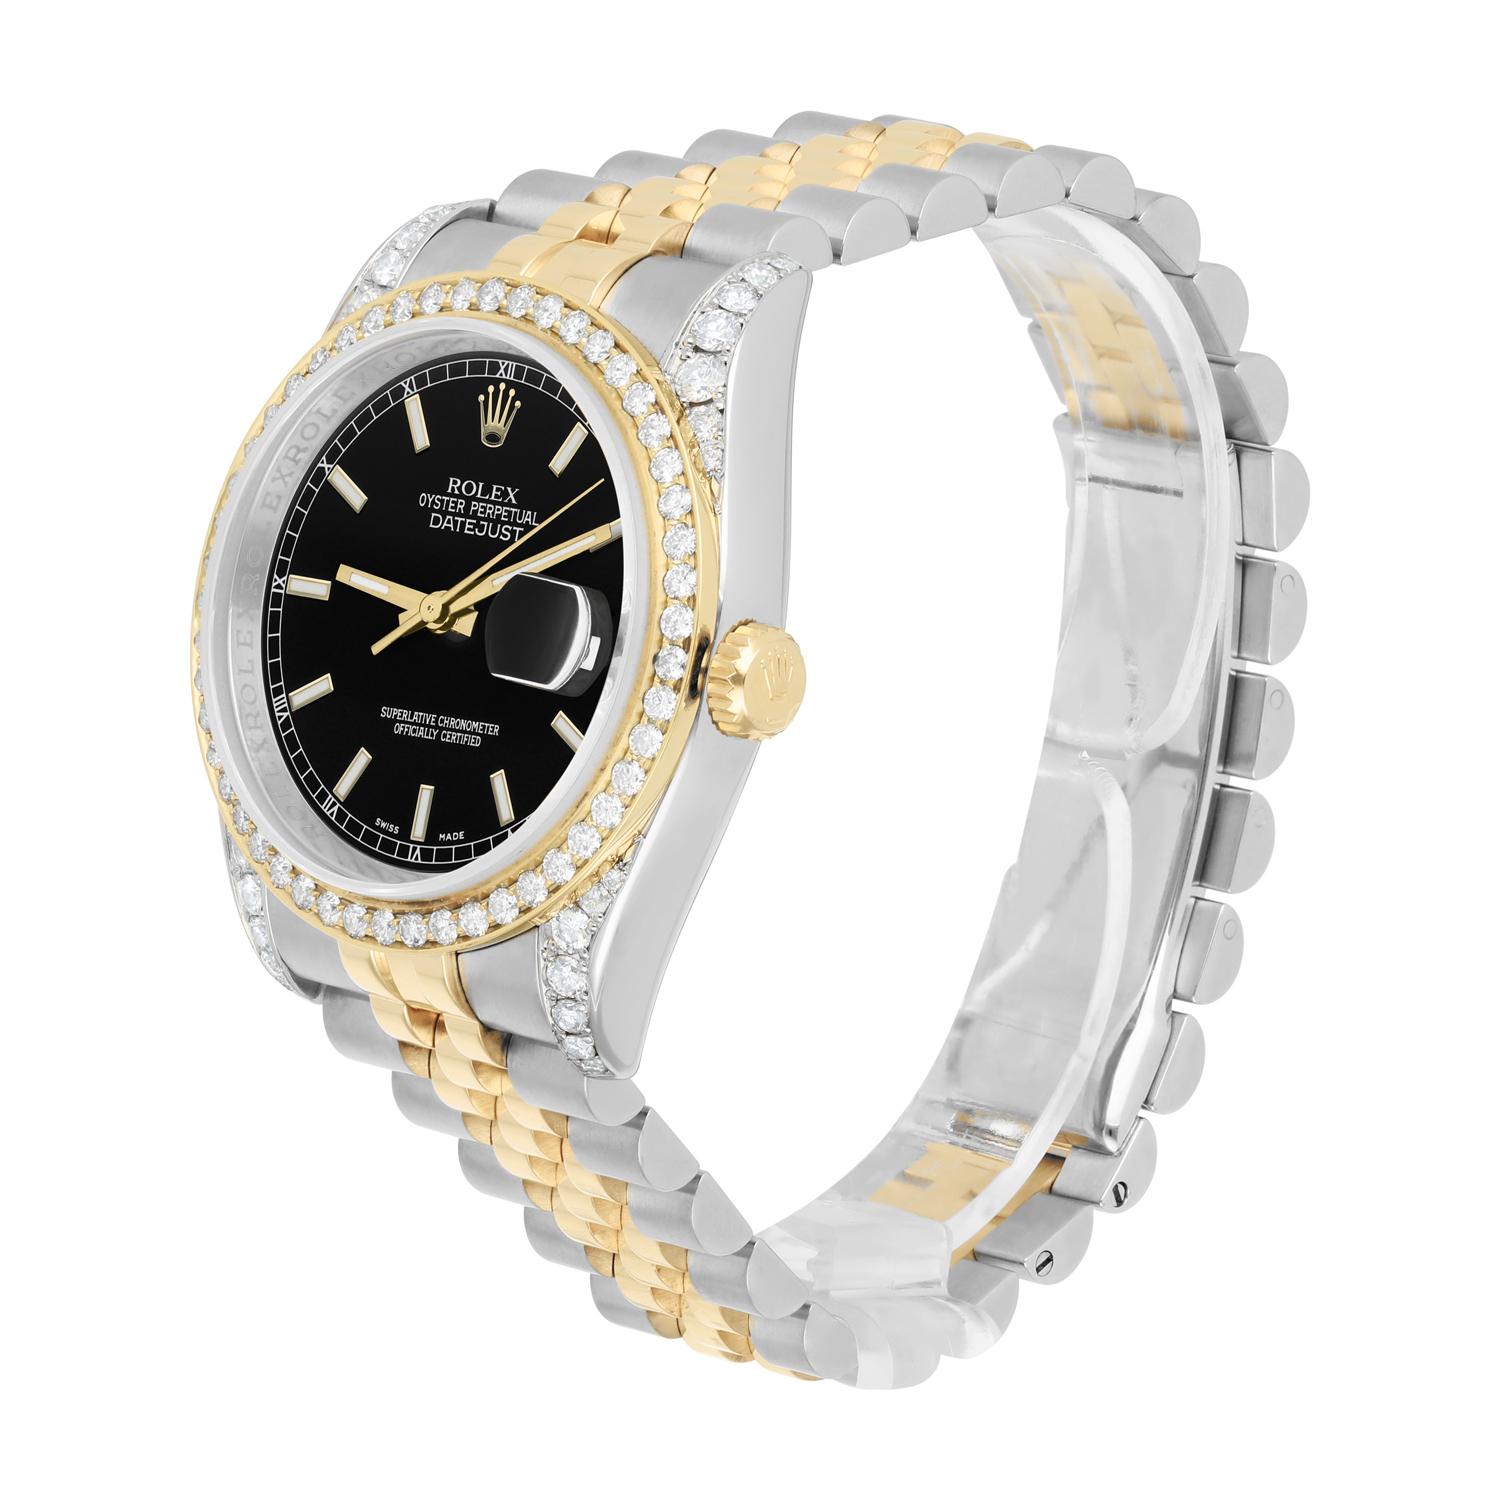 Women's or Men's Rolex Datejust 36 Gold/Steel 116233 Black Index Dial Jubilee Band Diamond Watch For Sale